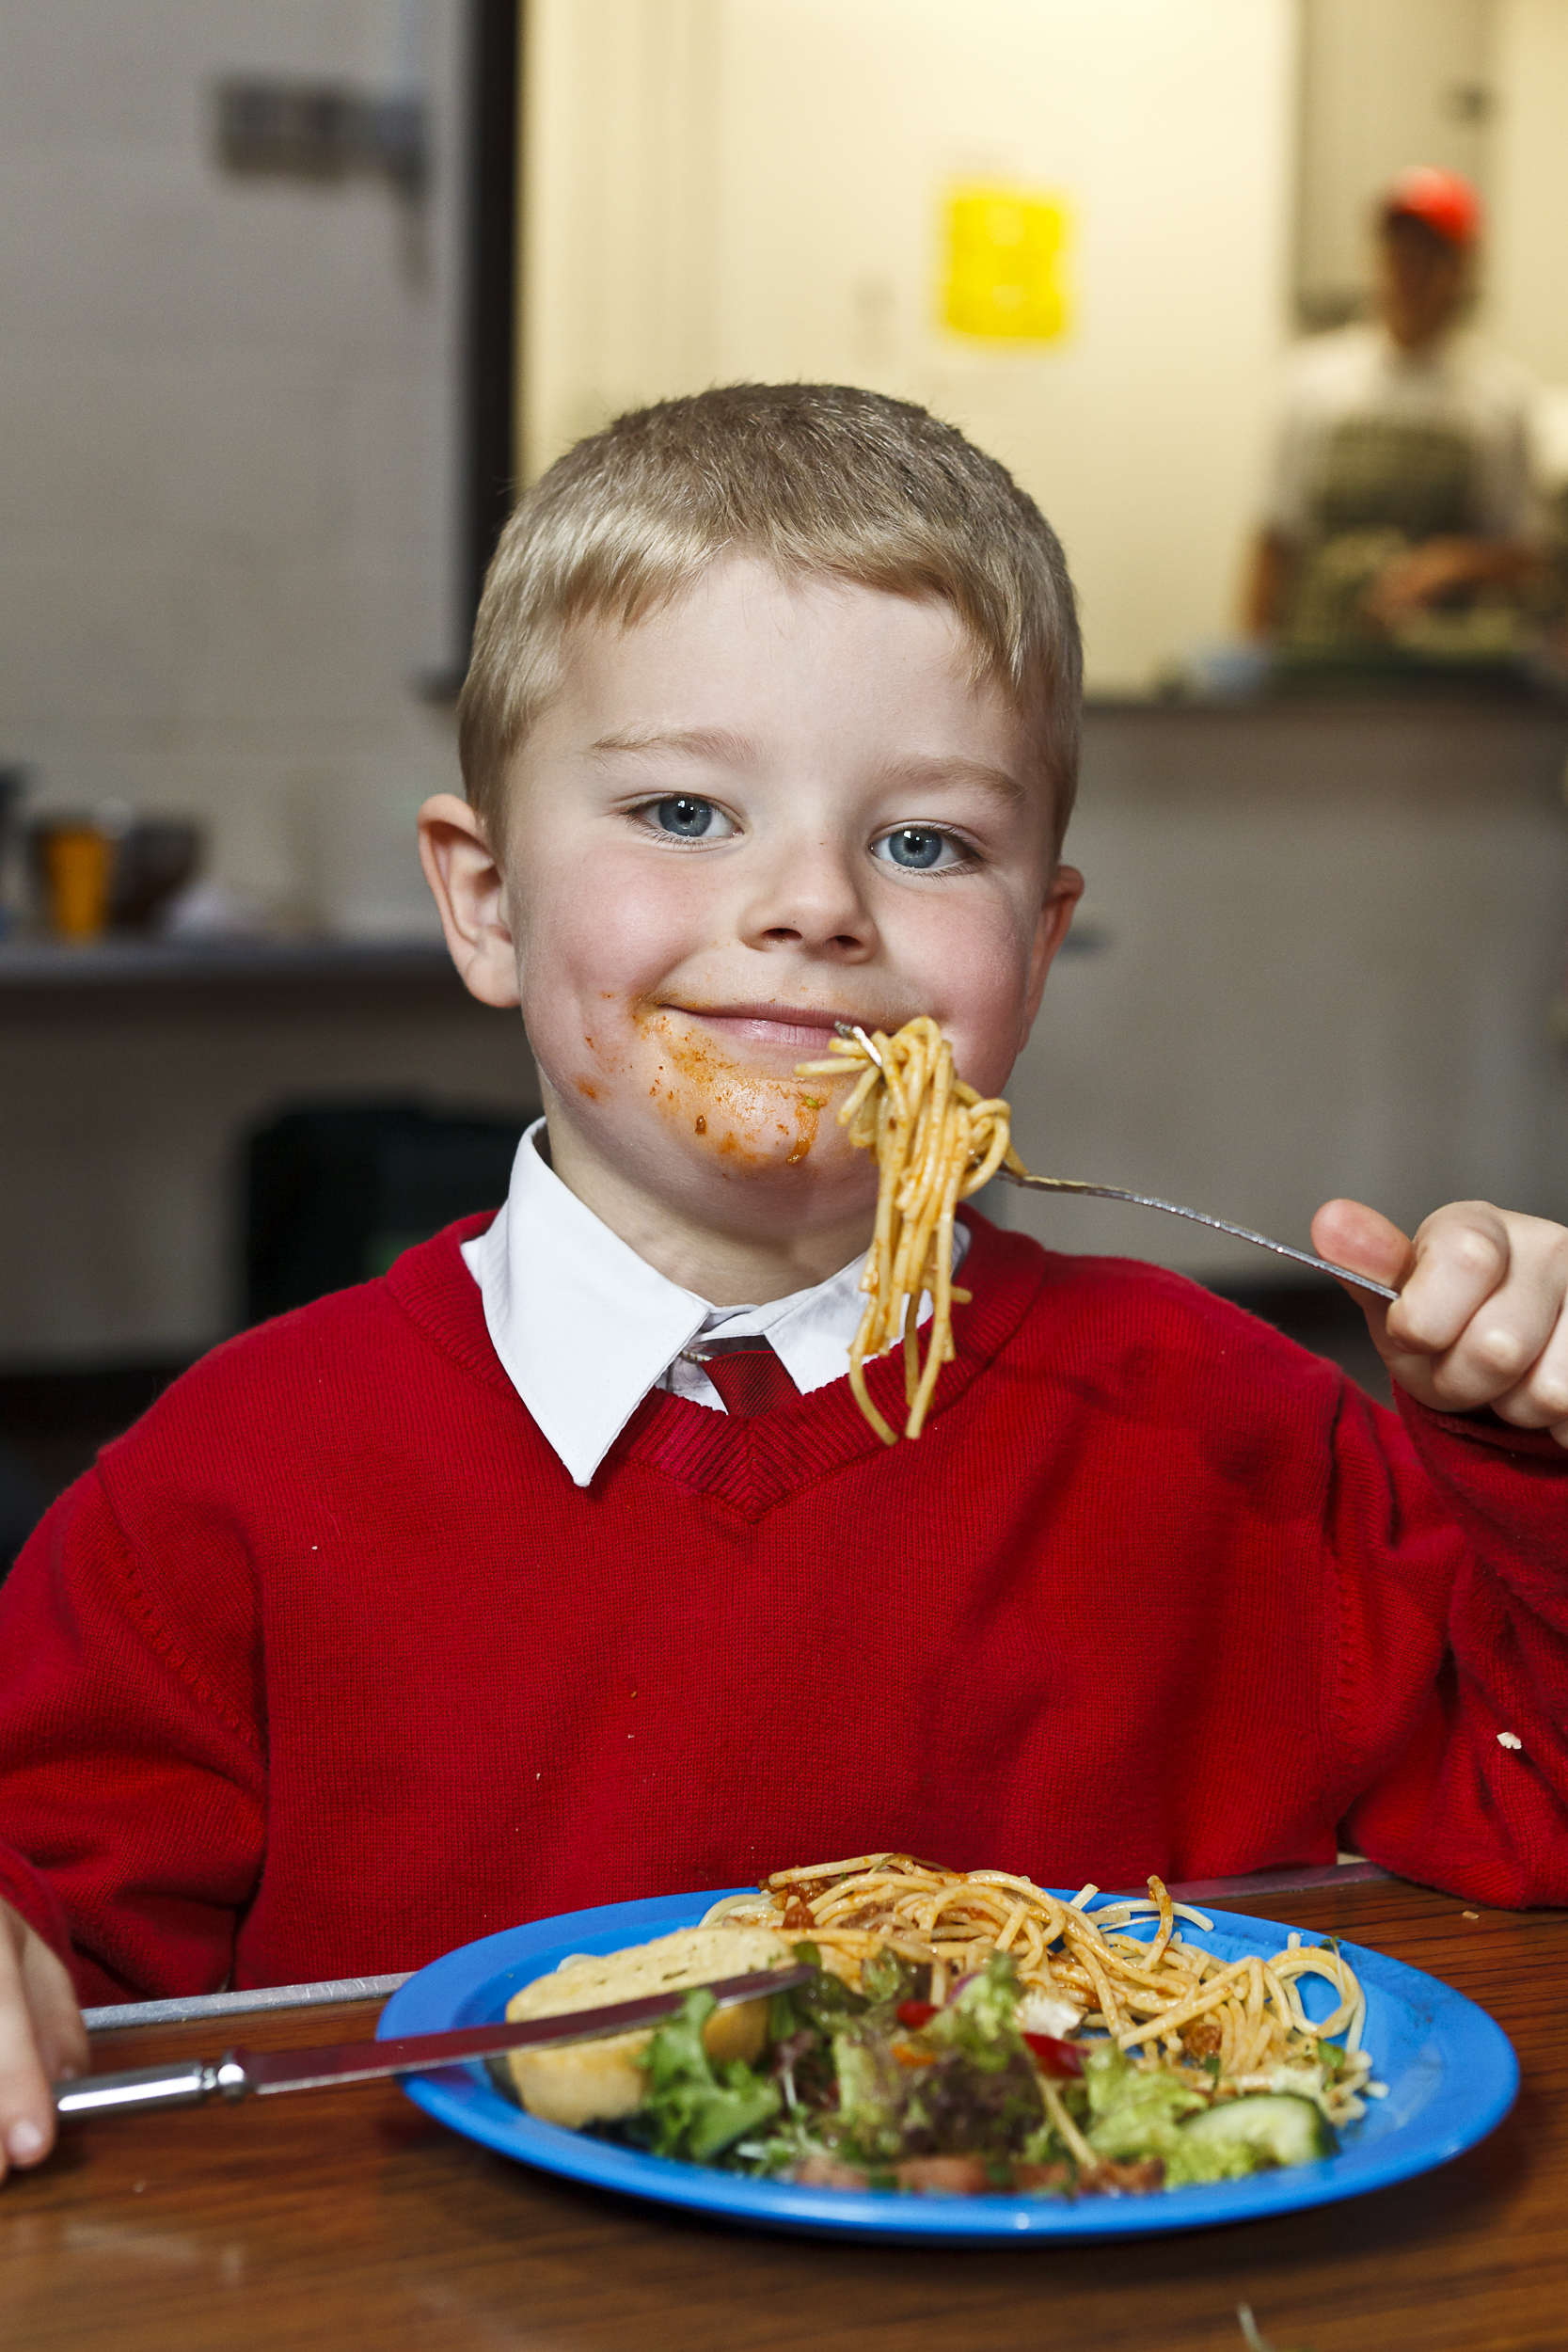 Child smiling and holding a forkful of spaghetti above a plate of spaghetti, salad and bread.